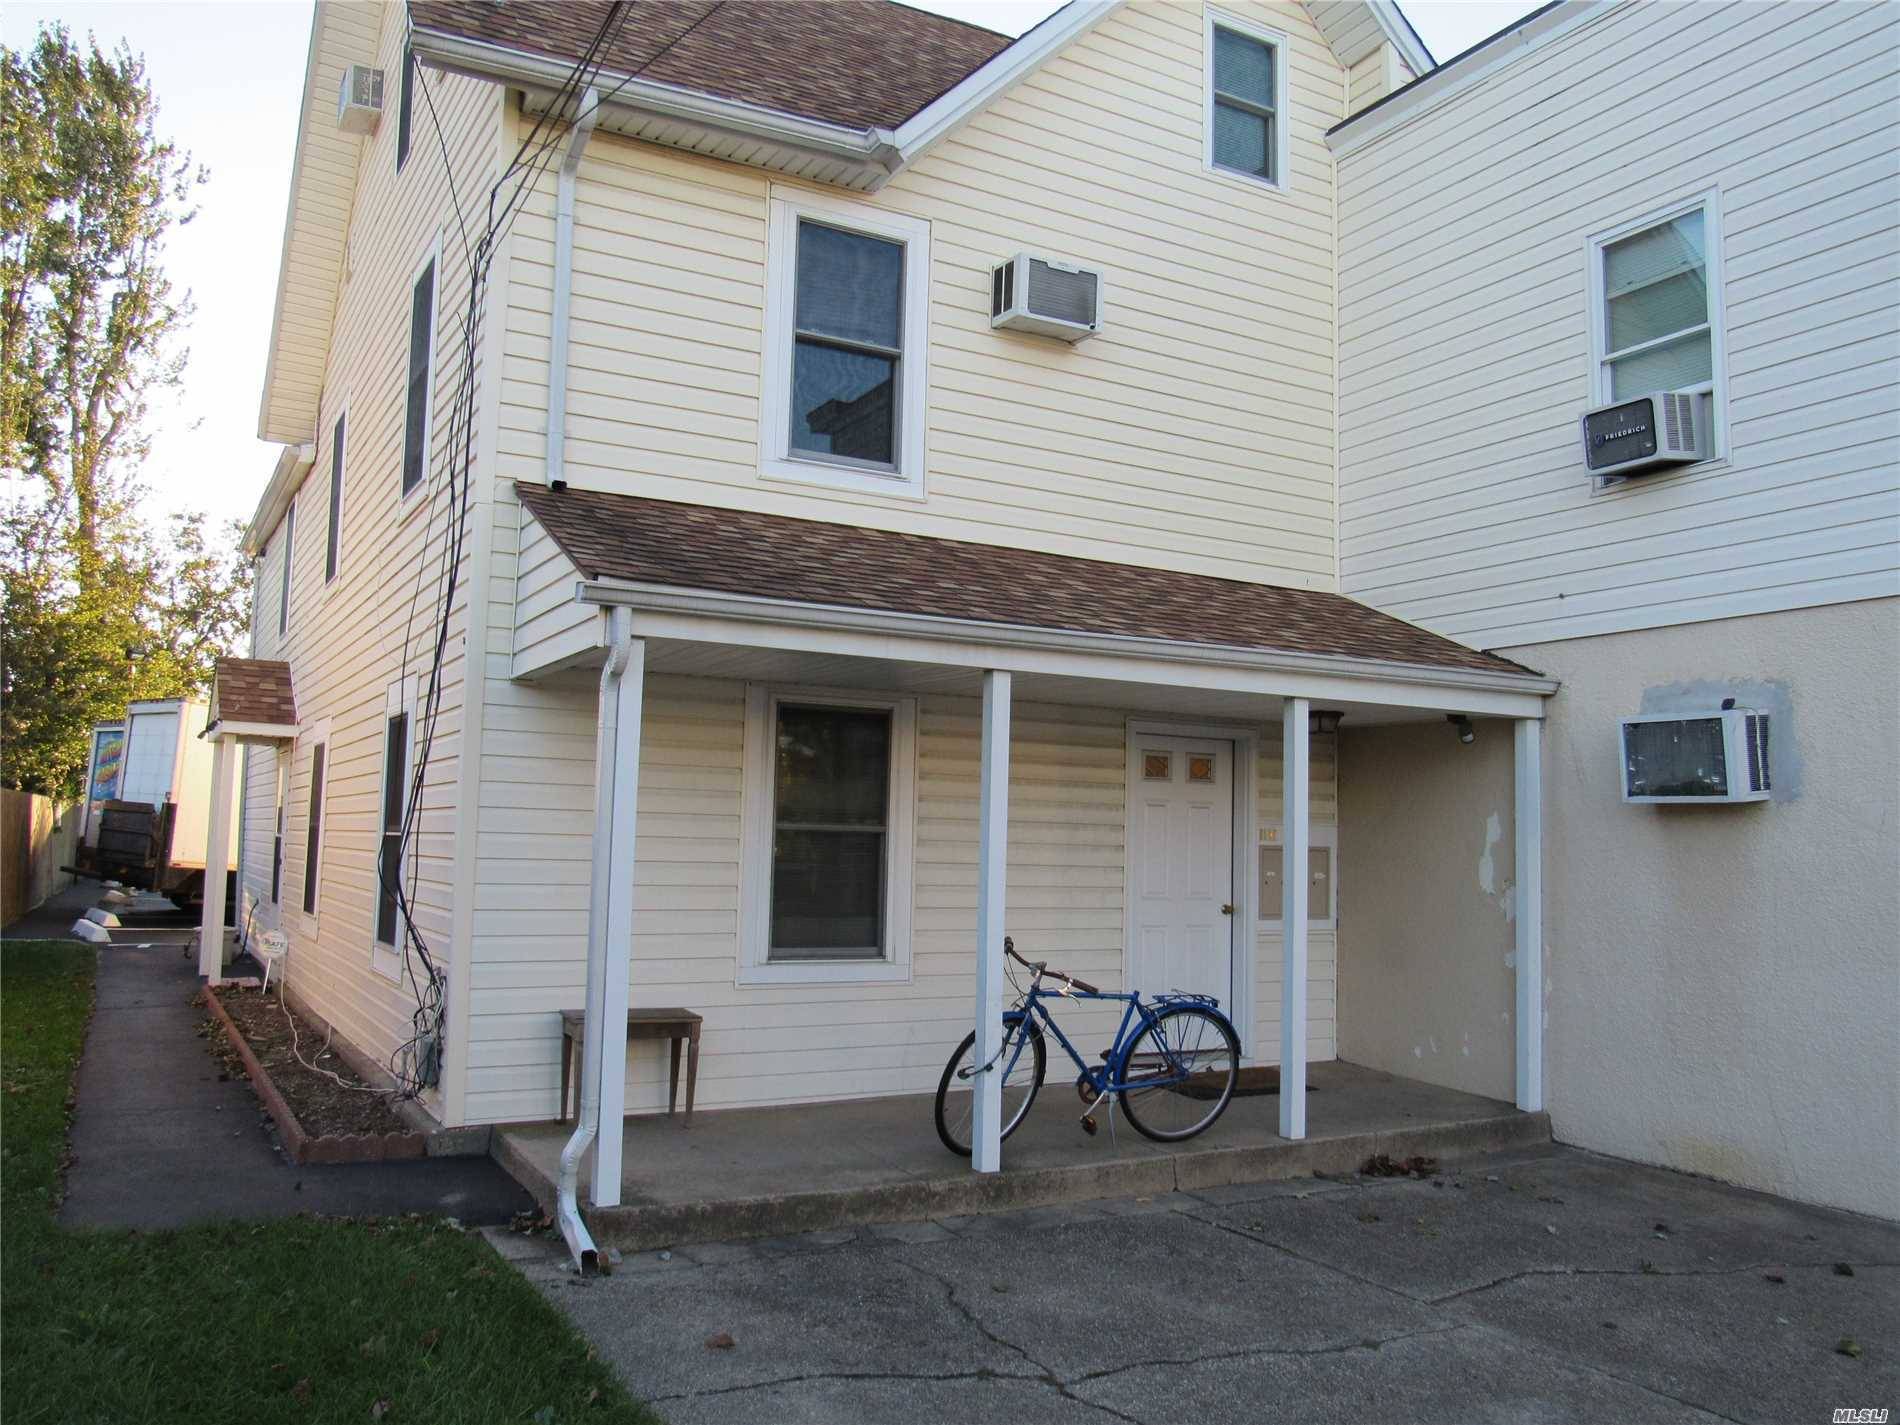 Prime Location, Hi Traffic Retail Store Plus 3 Apartments One 2 Br And Two 1Br's Each Apt.